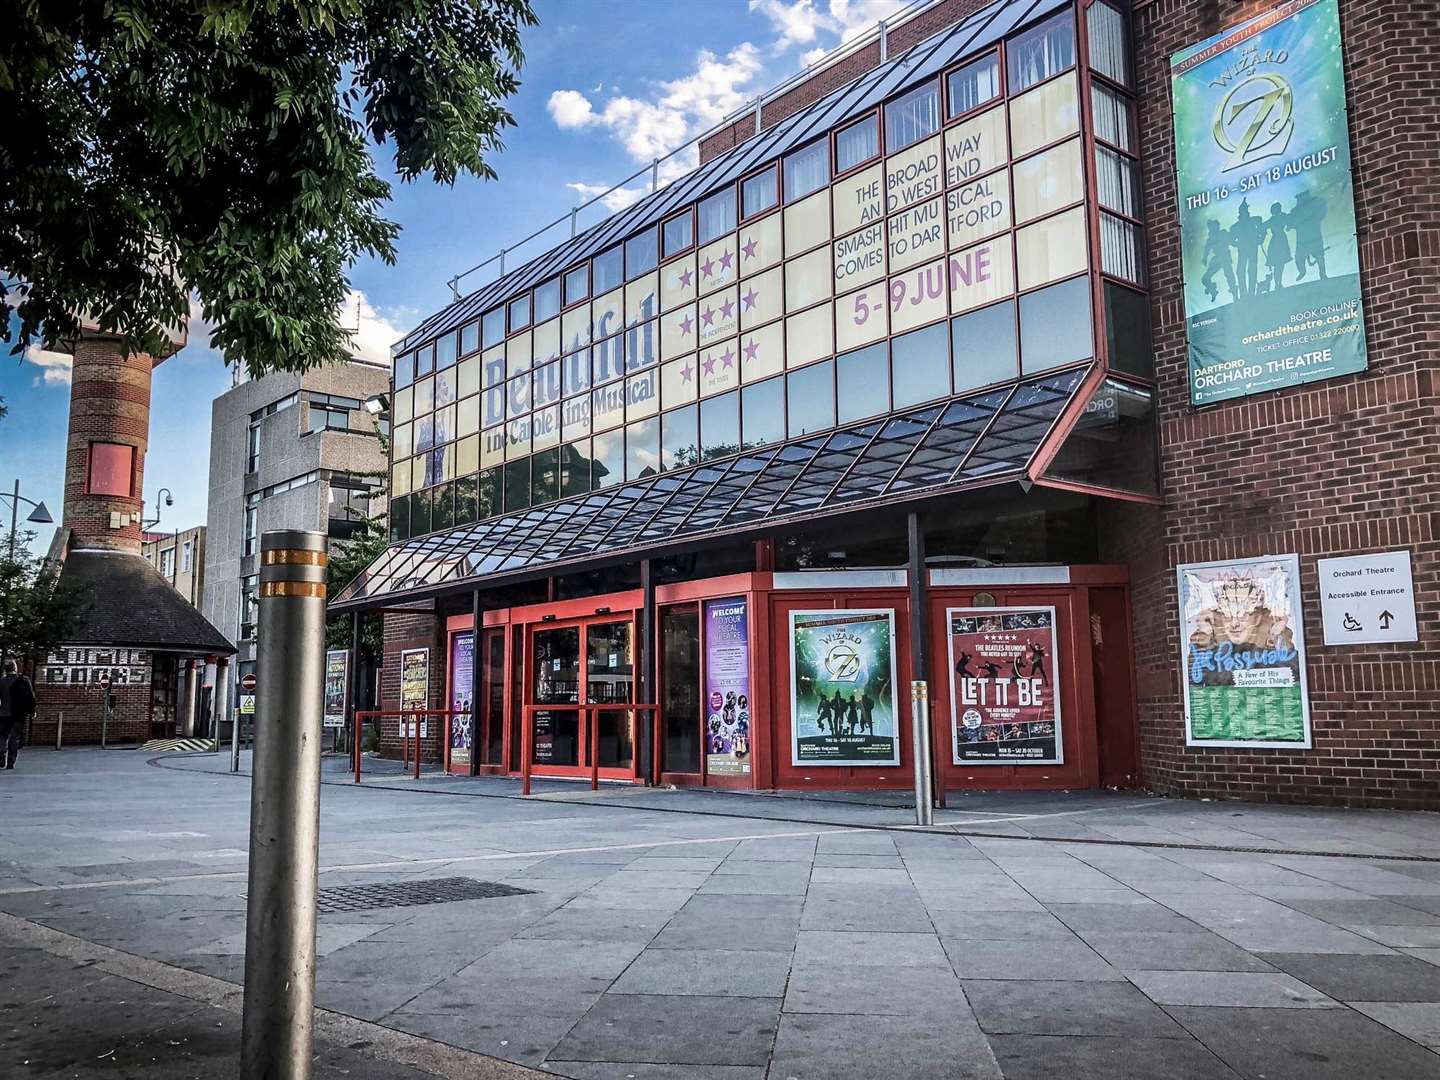 The Orchard Theatre in Dartford is managed by the HQ Theatre Group. Picture: Orchard Theatre